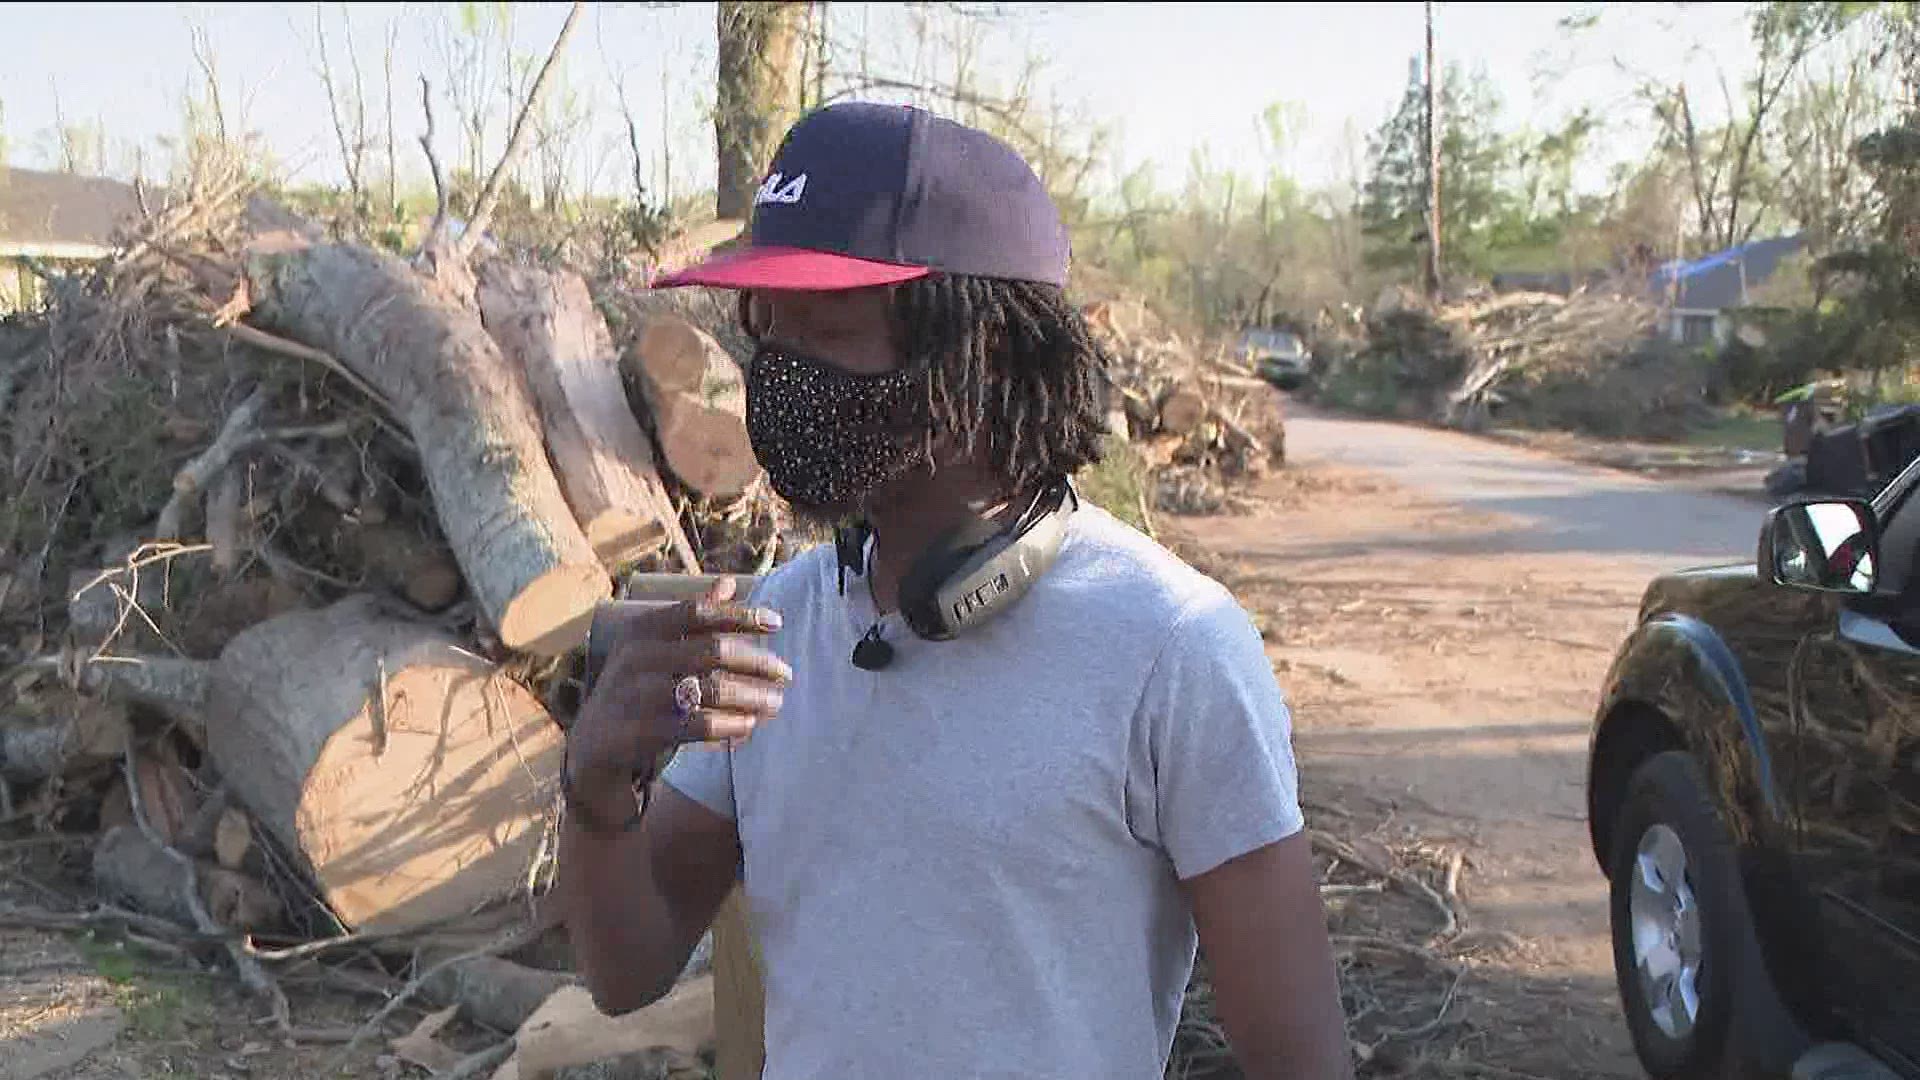 Newnan families are still recovering from the EF-4 tornado that wreaked havoc in the community.